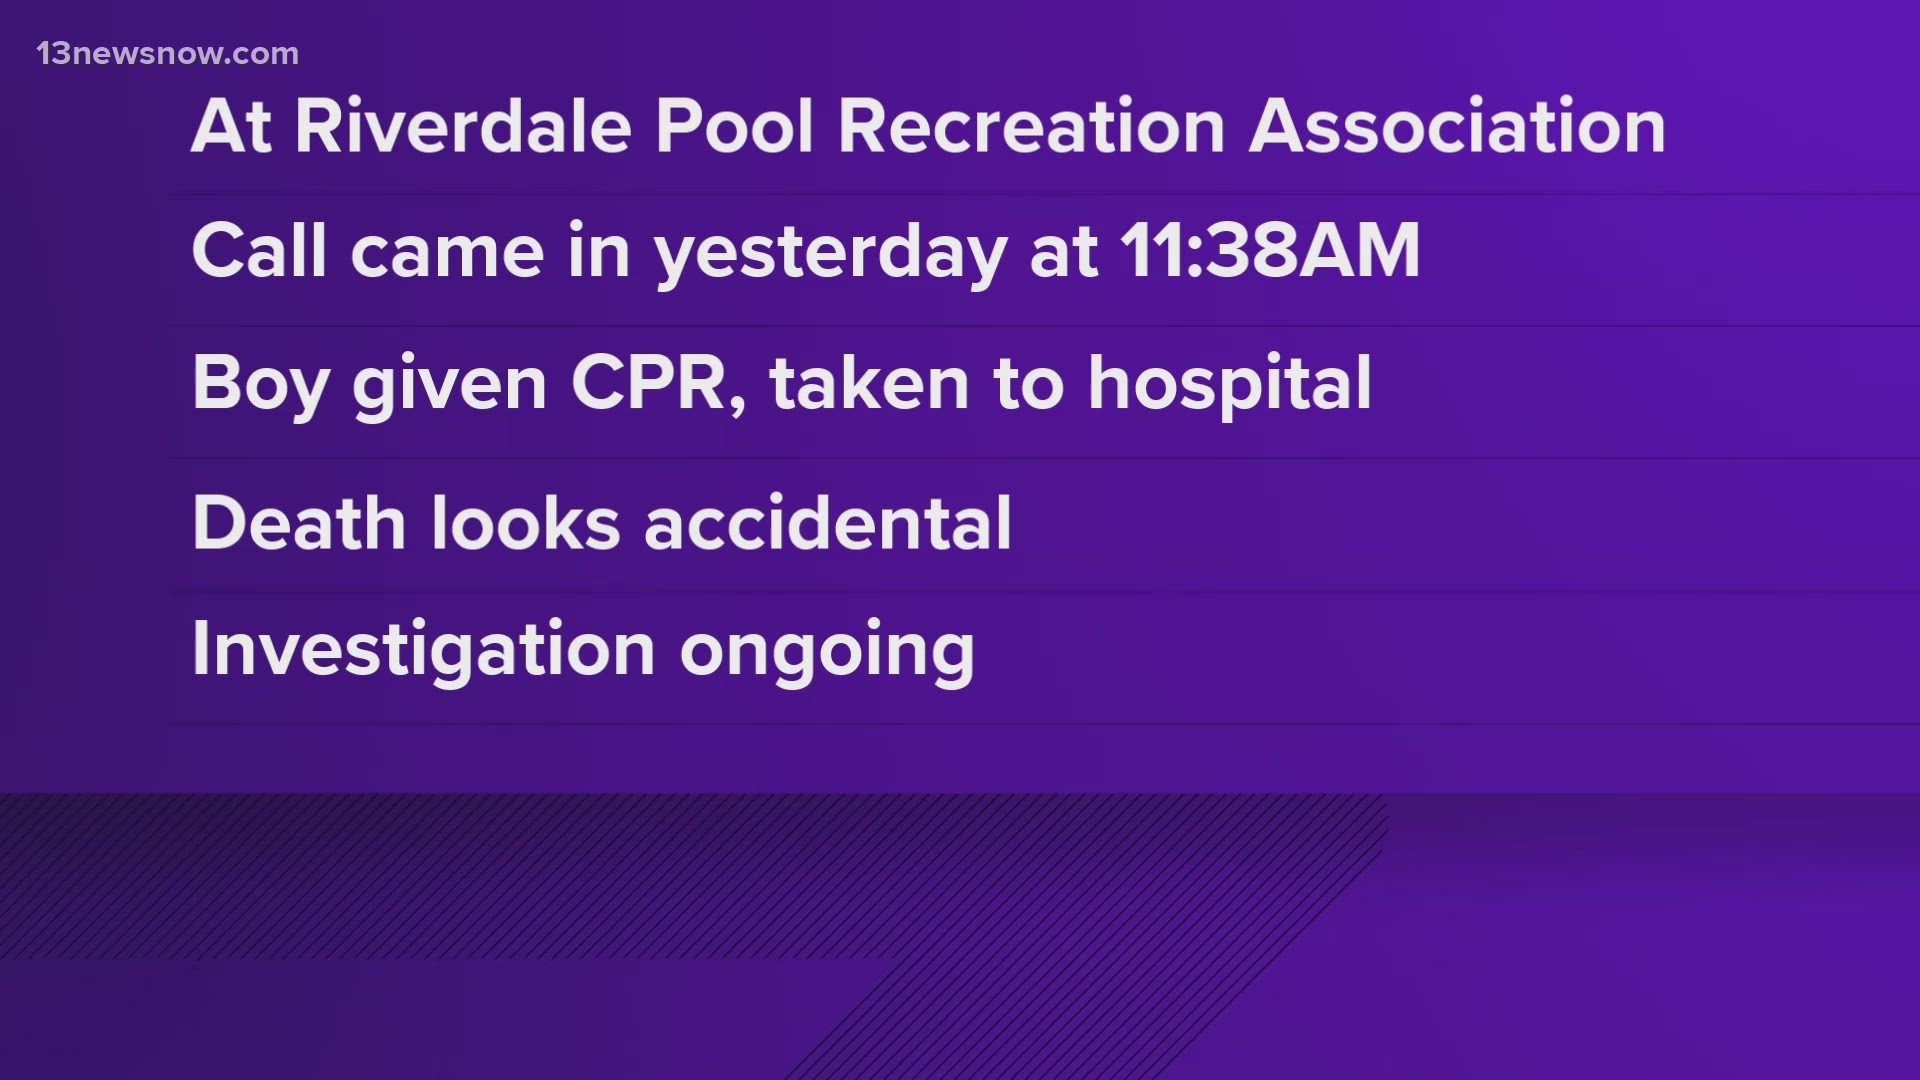 CPR was performed on the teenage boy at the Riverdale Pool Recreation Association in Hampton